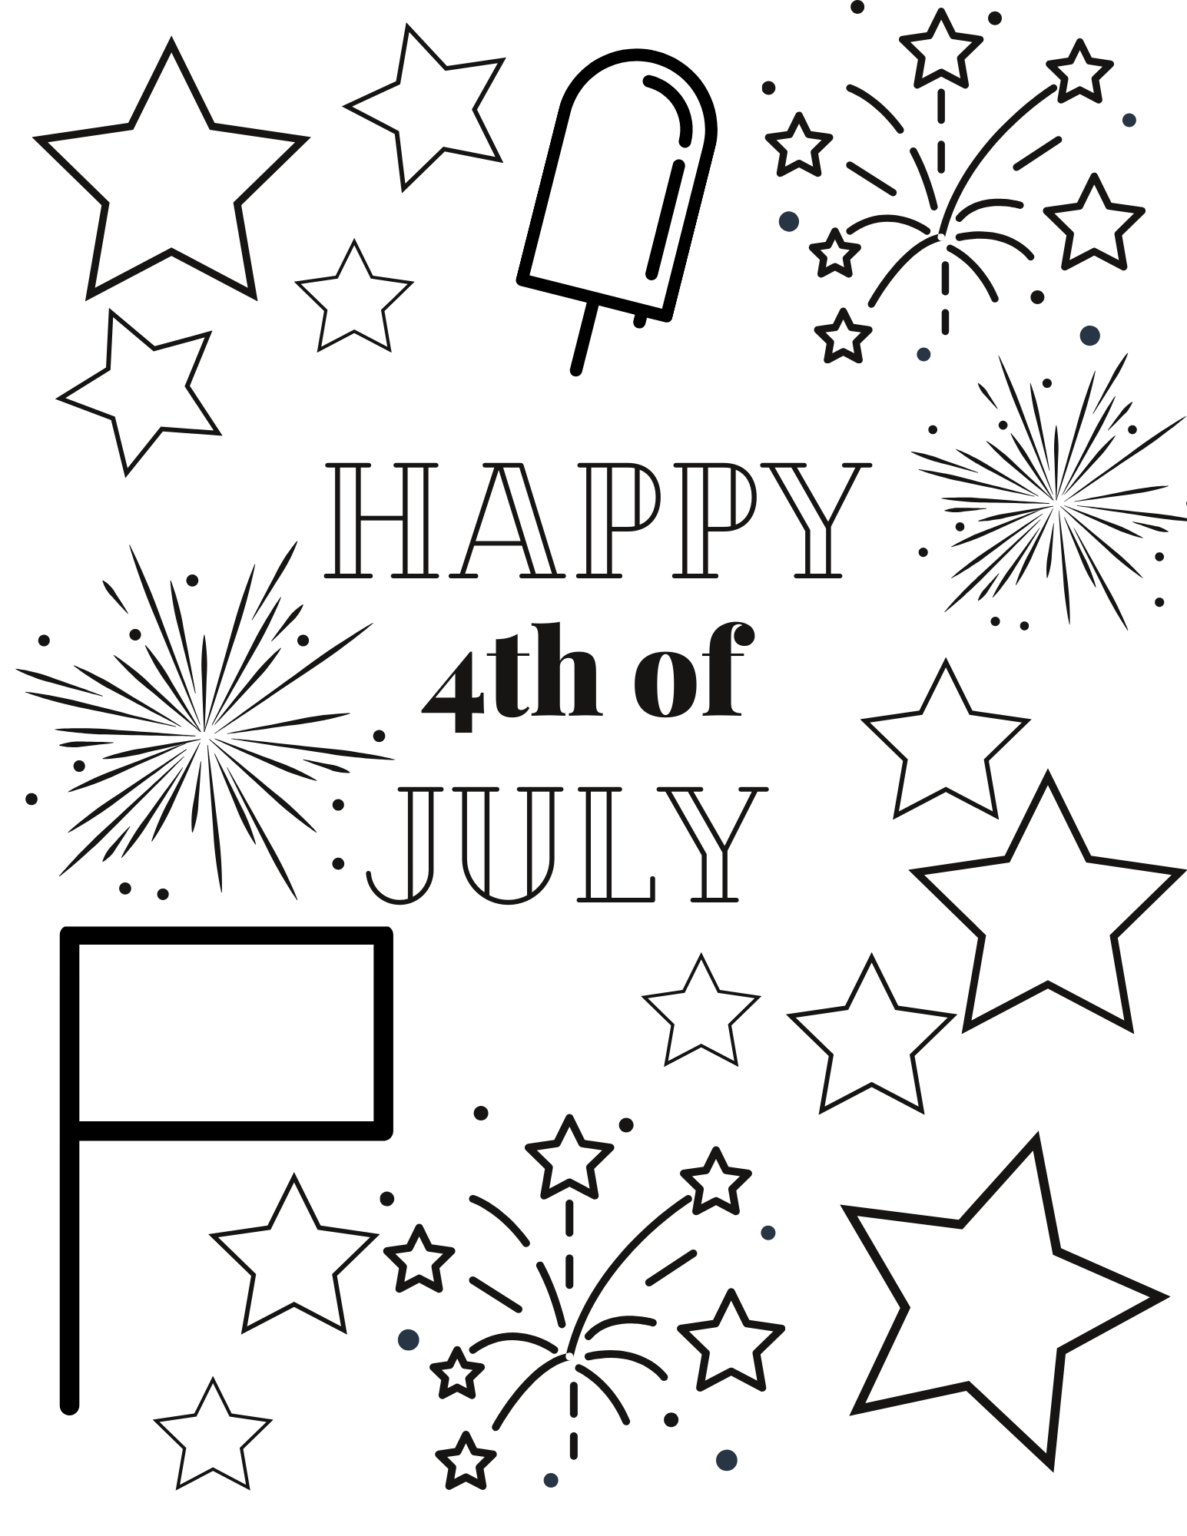 4th-of-july-worksheets-for-kids-holiday-worksheets-worksheets-for-kids-fourth-of-july-crafts